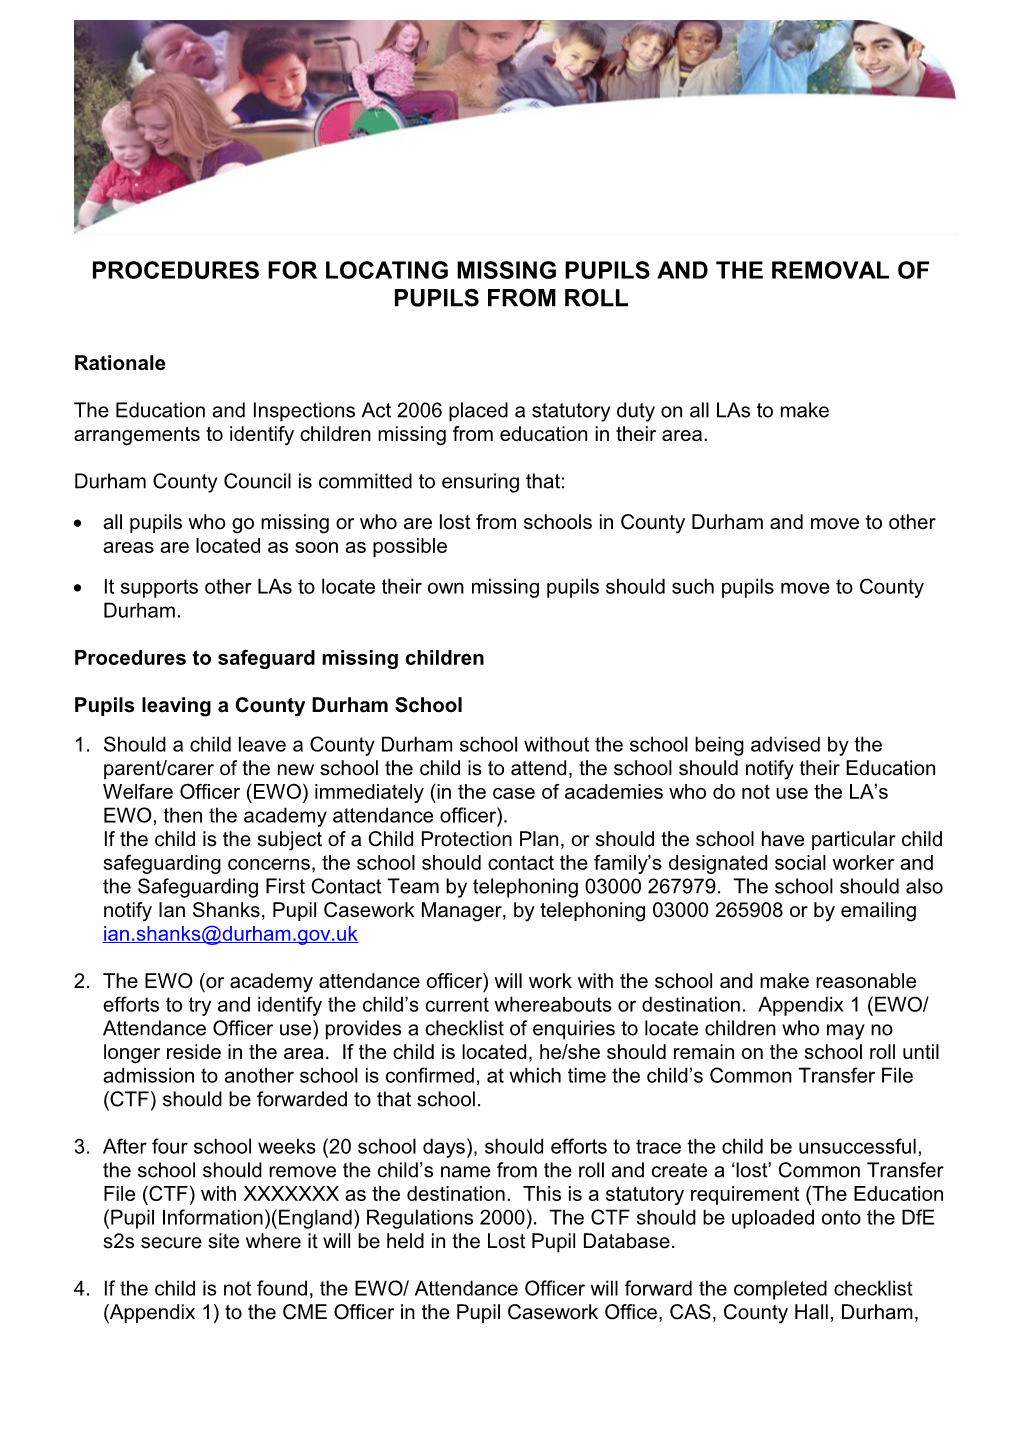 Procedures for Locating Missing Pupils and the Removal of Pupils from Roll